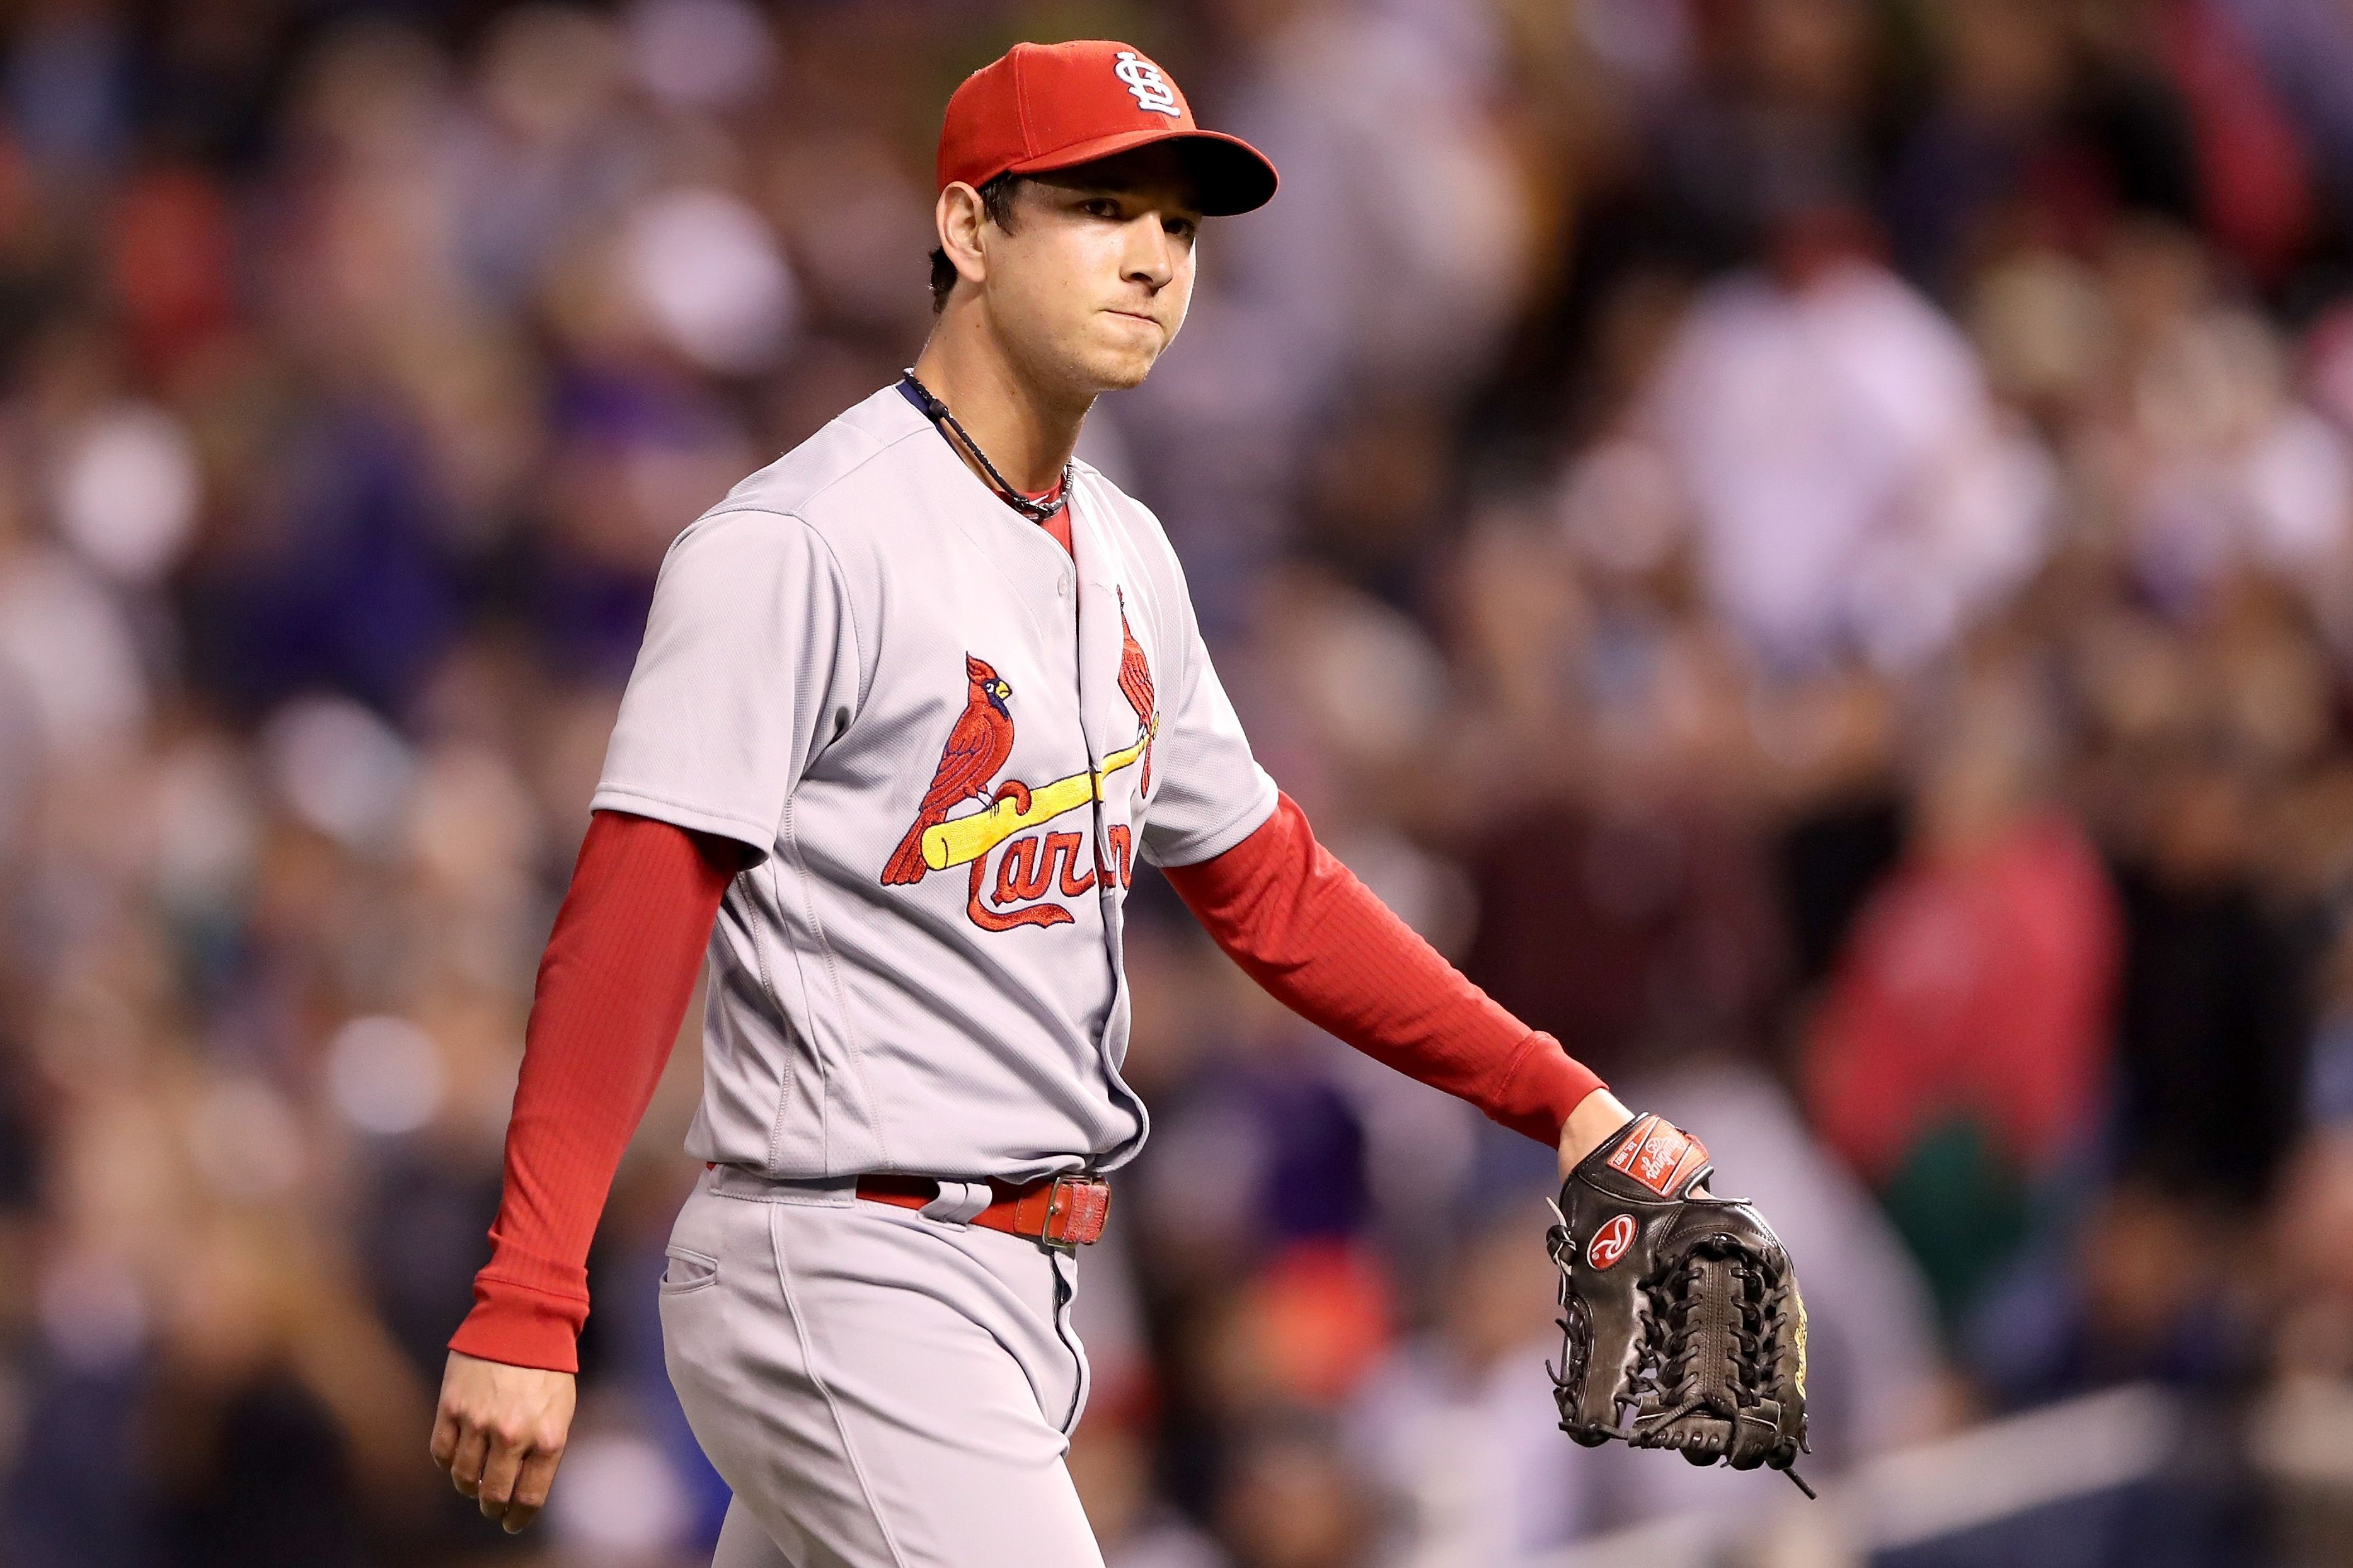 St. Louis Cardinals Rule 5 Draft approaches and some need saving